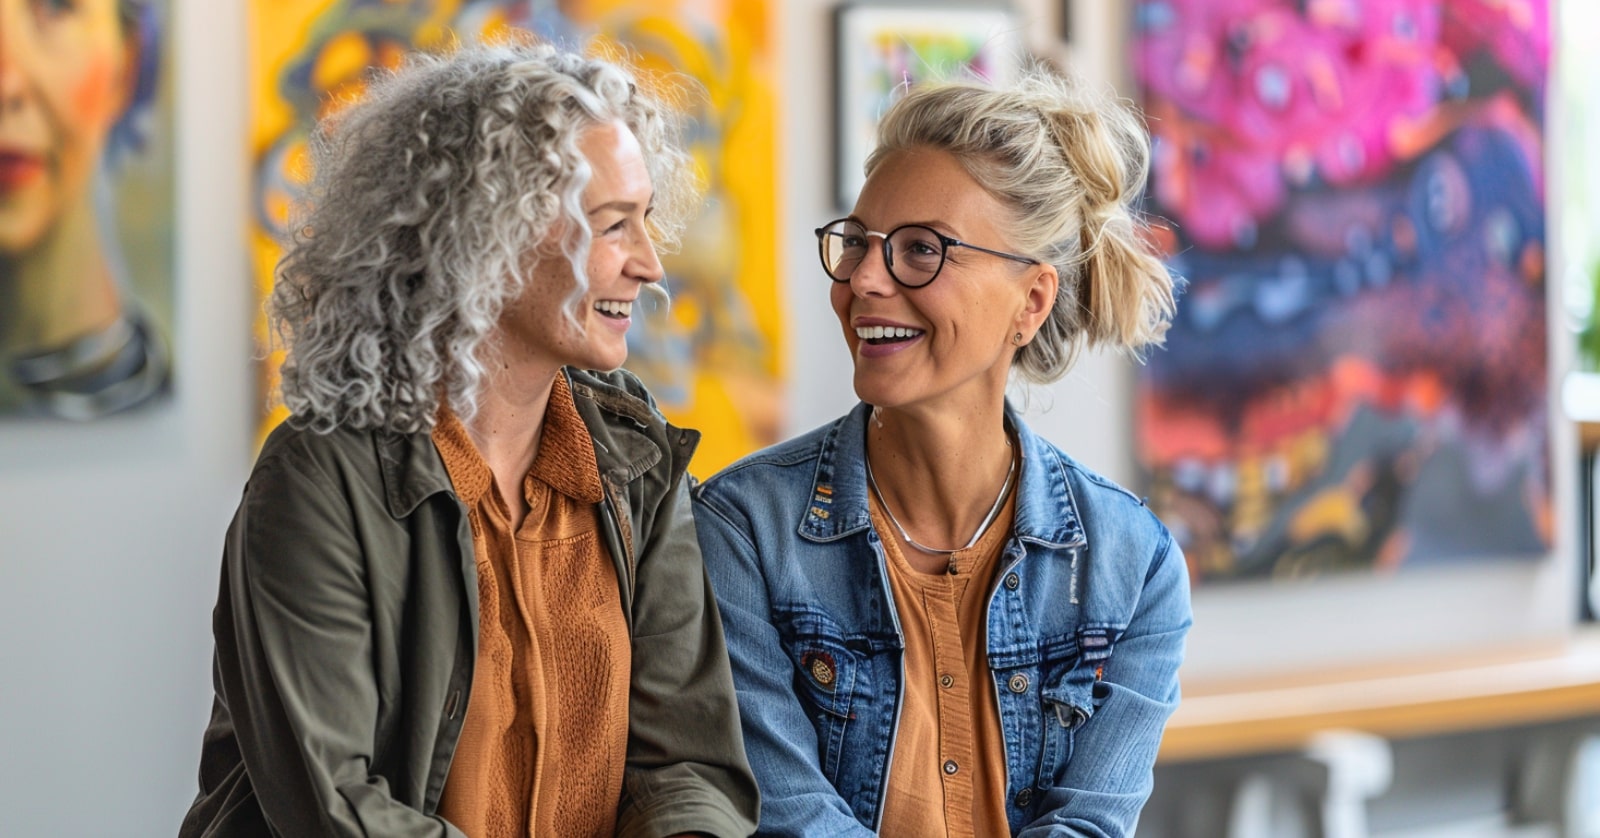 two smiling women in conversation while sitting on a bench at an art gallery